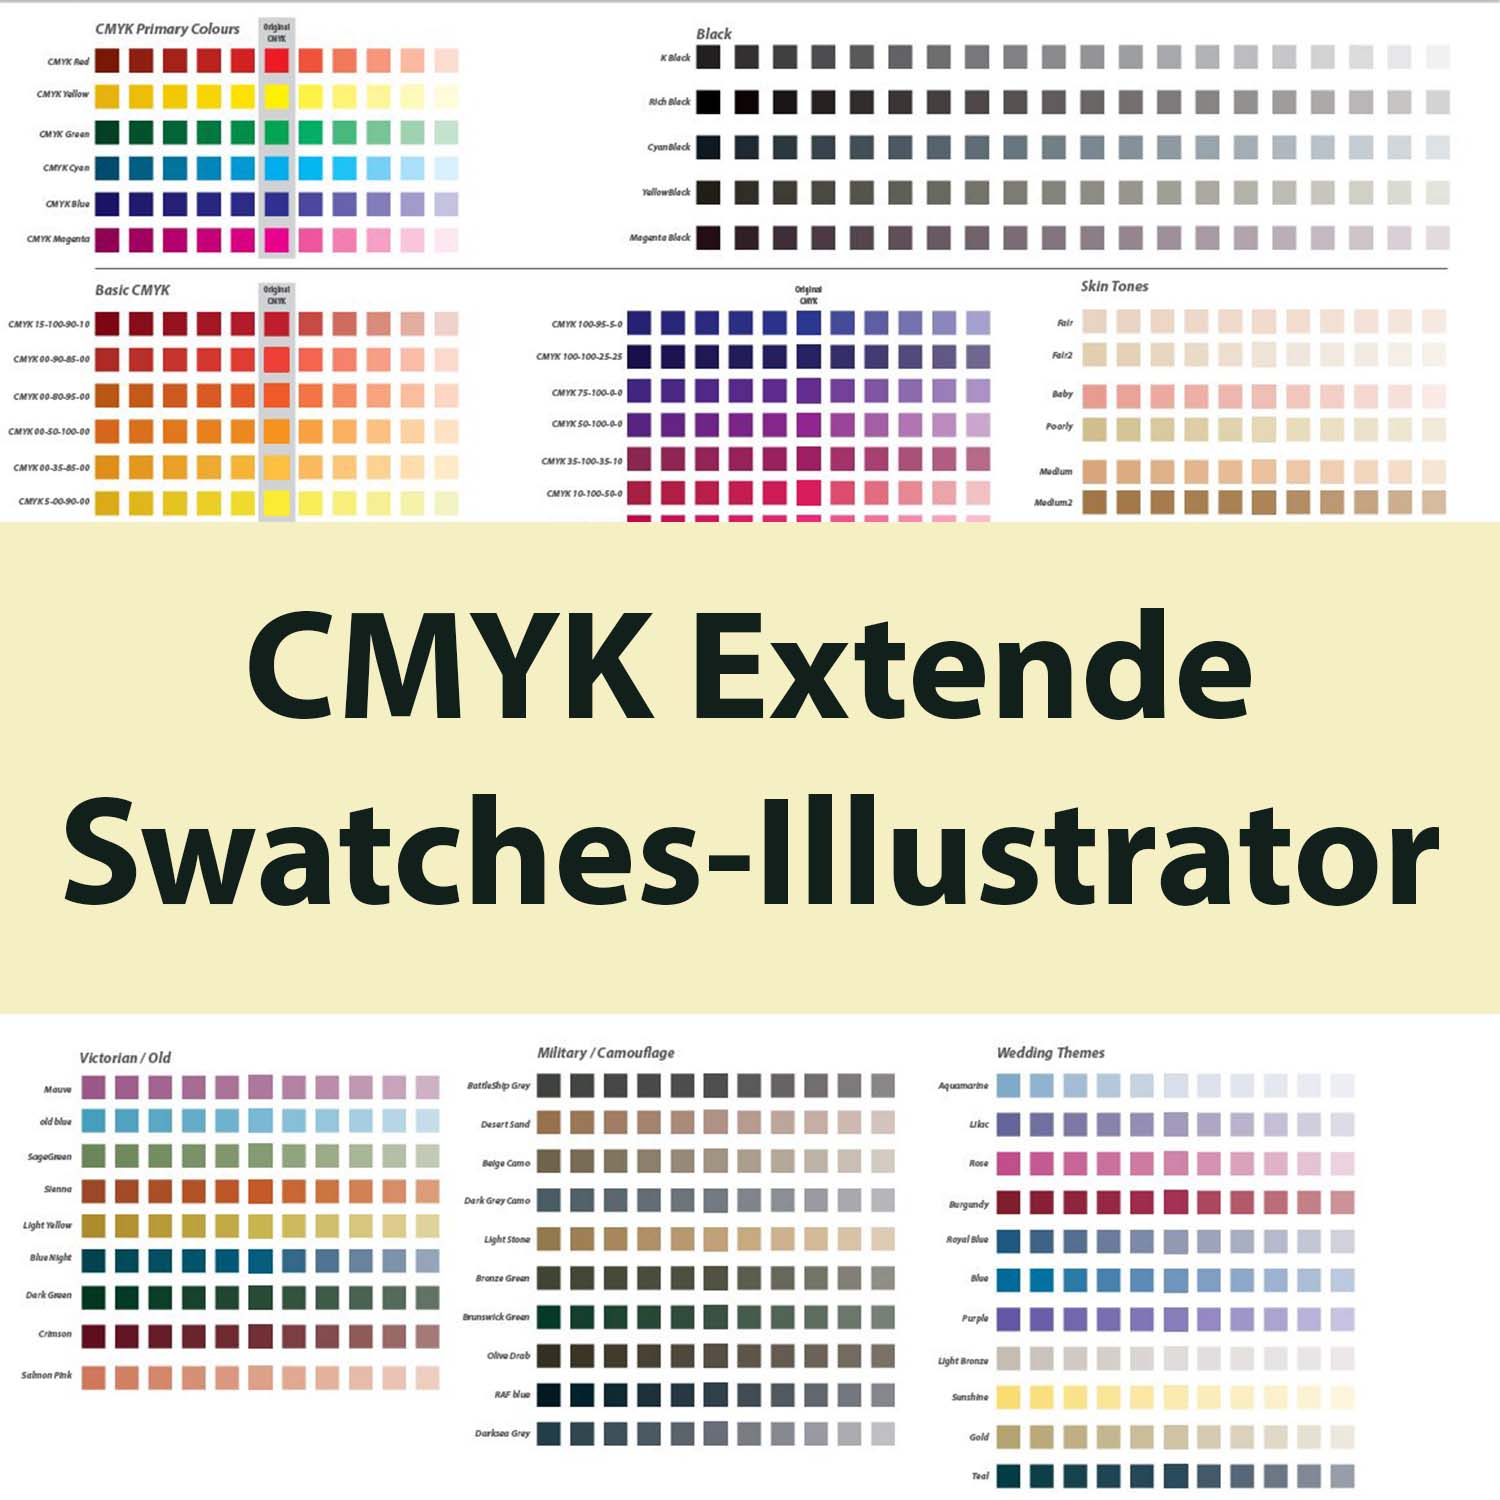 CMYK Extended Swatches Cover image.